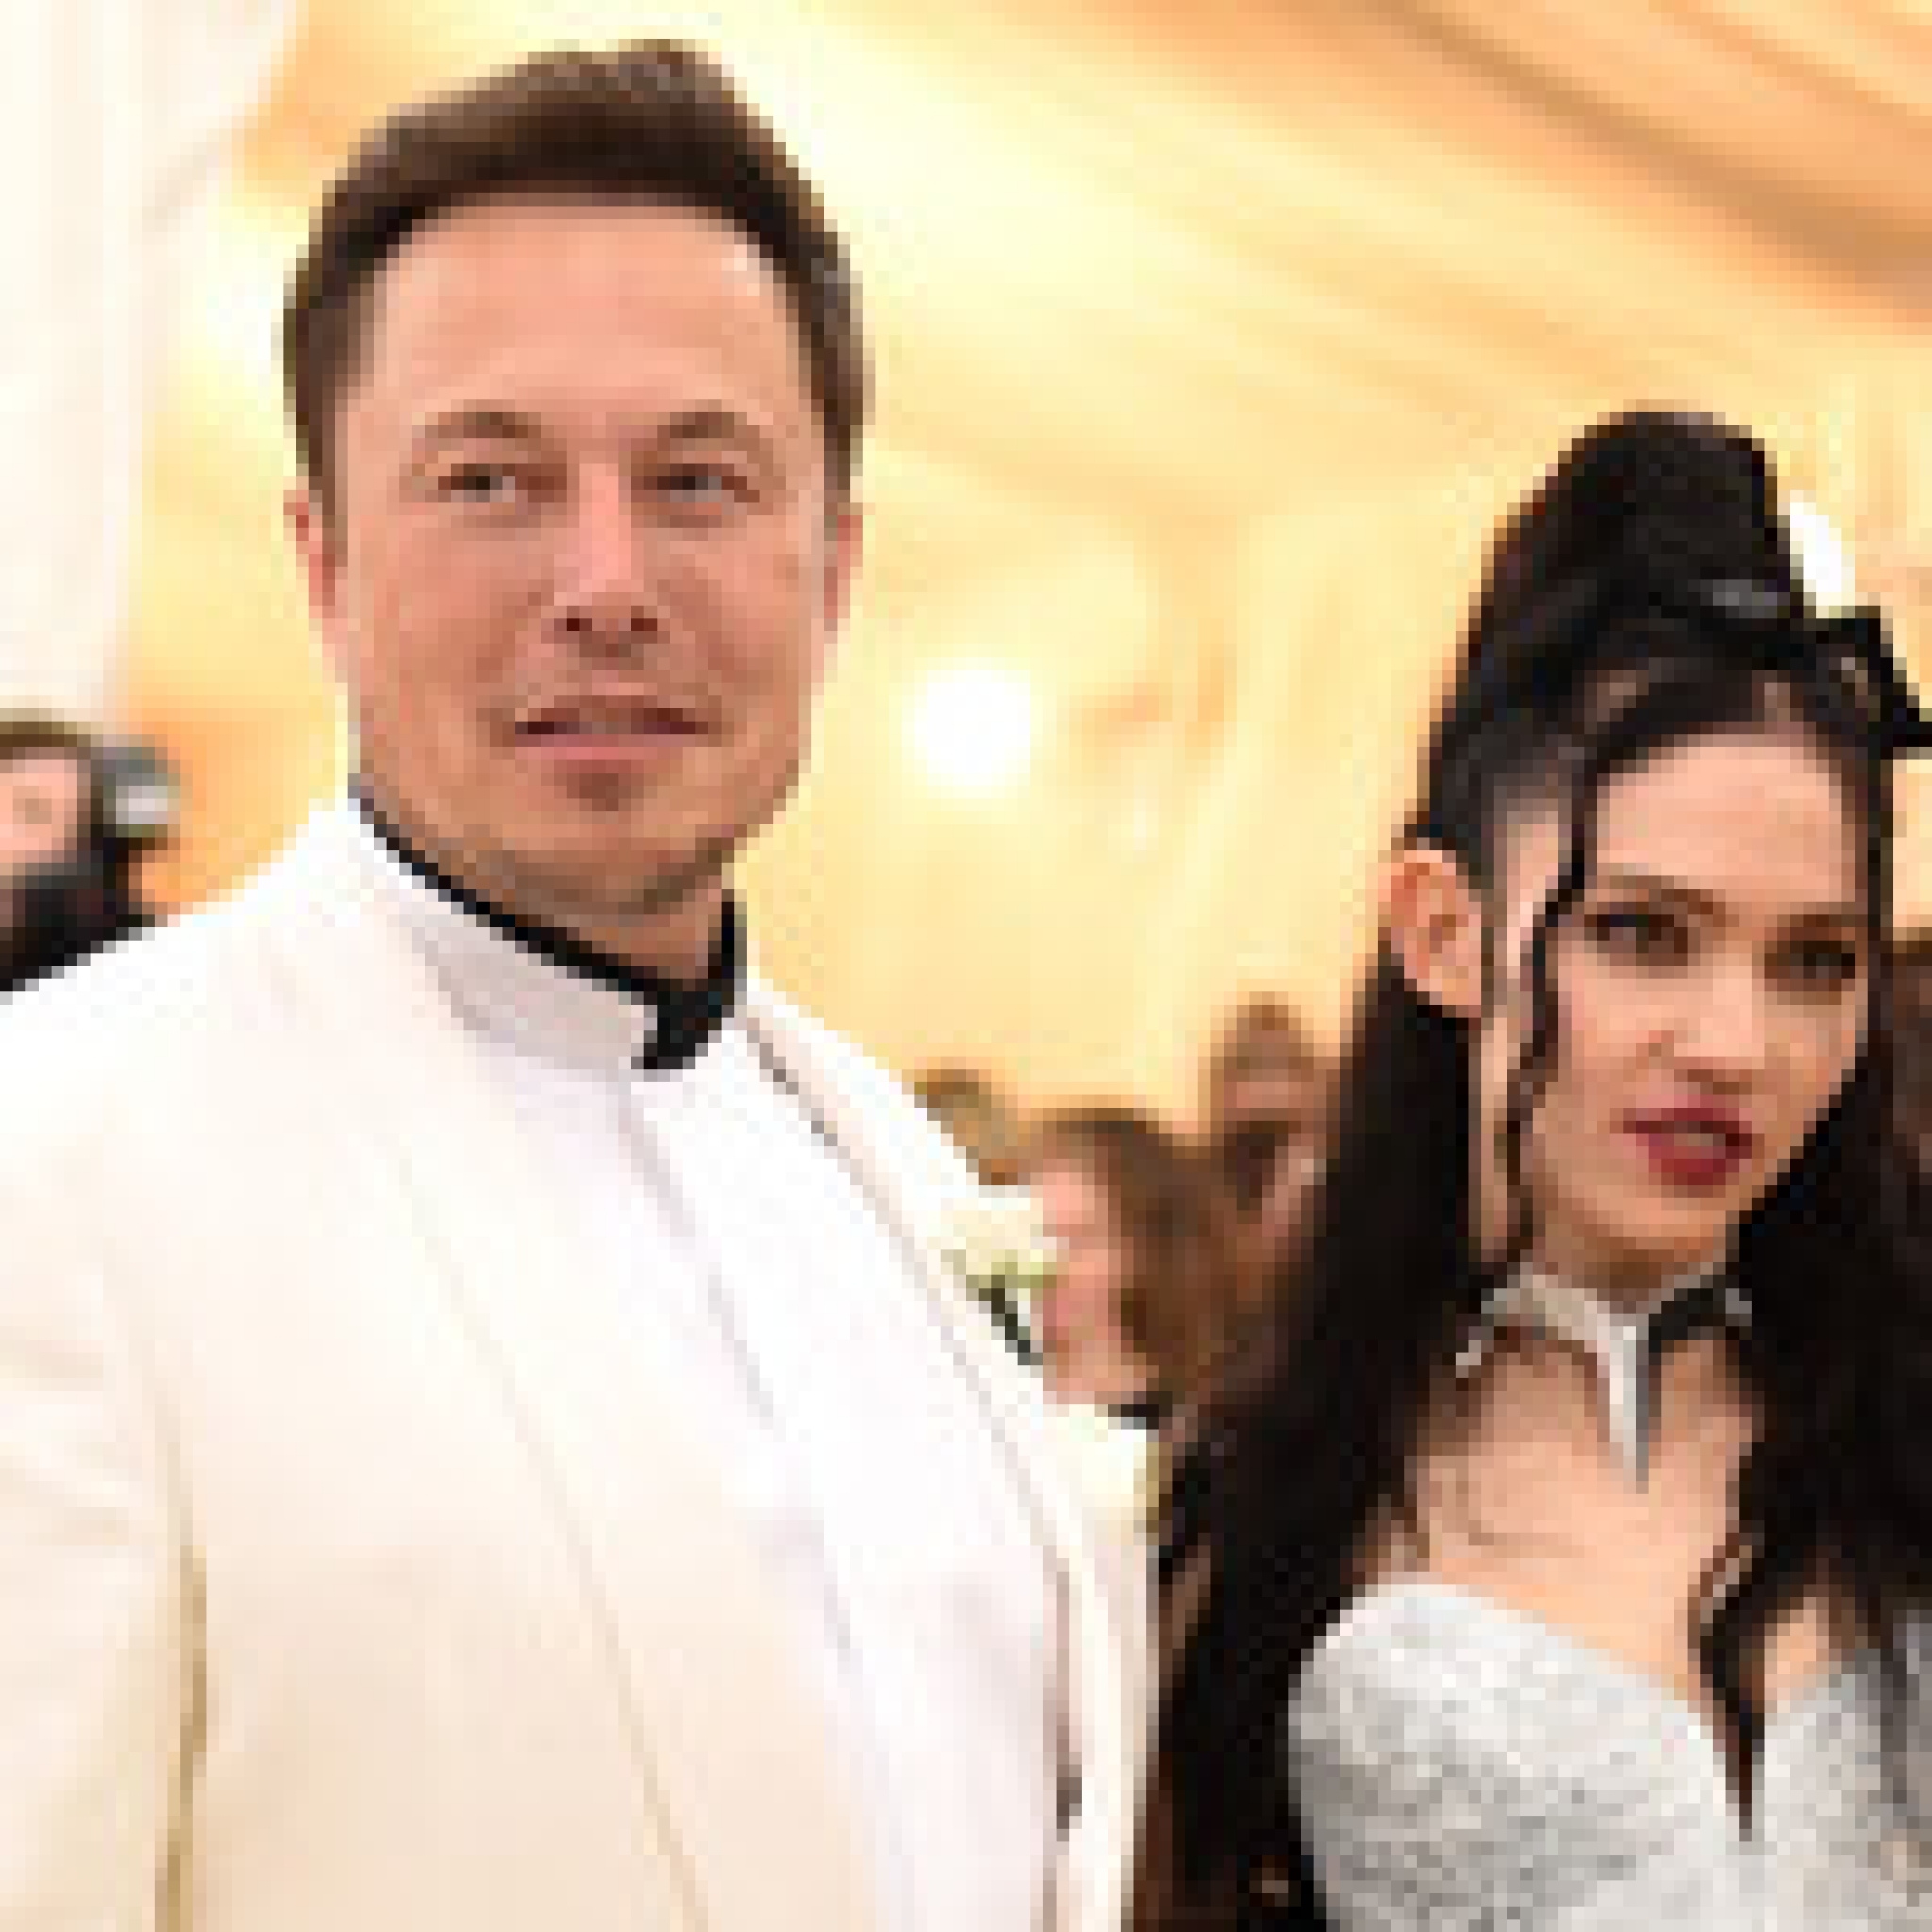 Grimes to Join Elon Musk on ‘SNL’: ‘Watch Me Try Acting!’